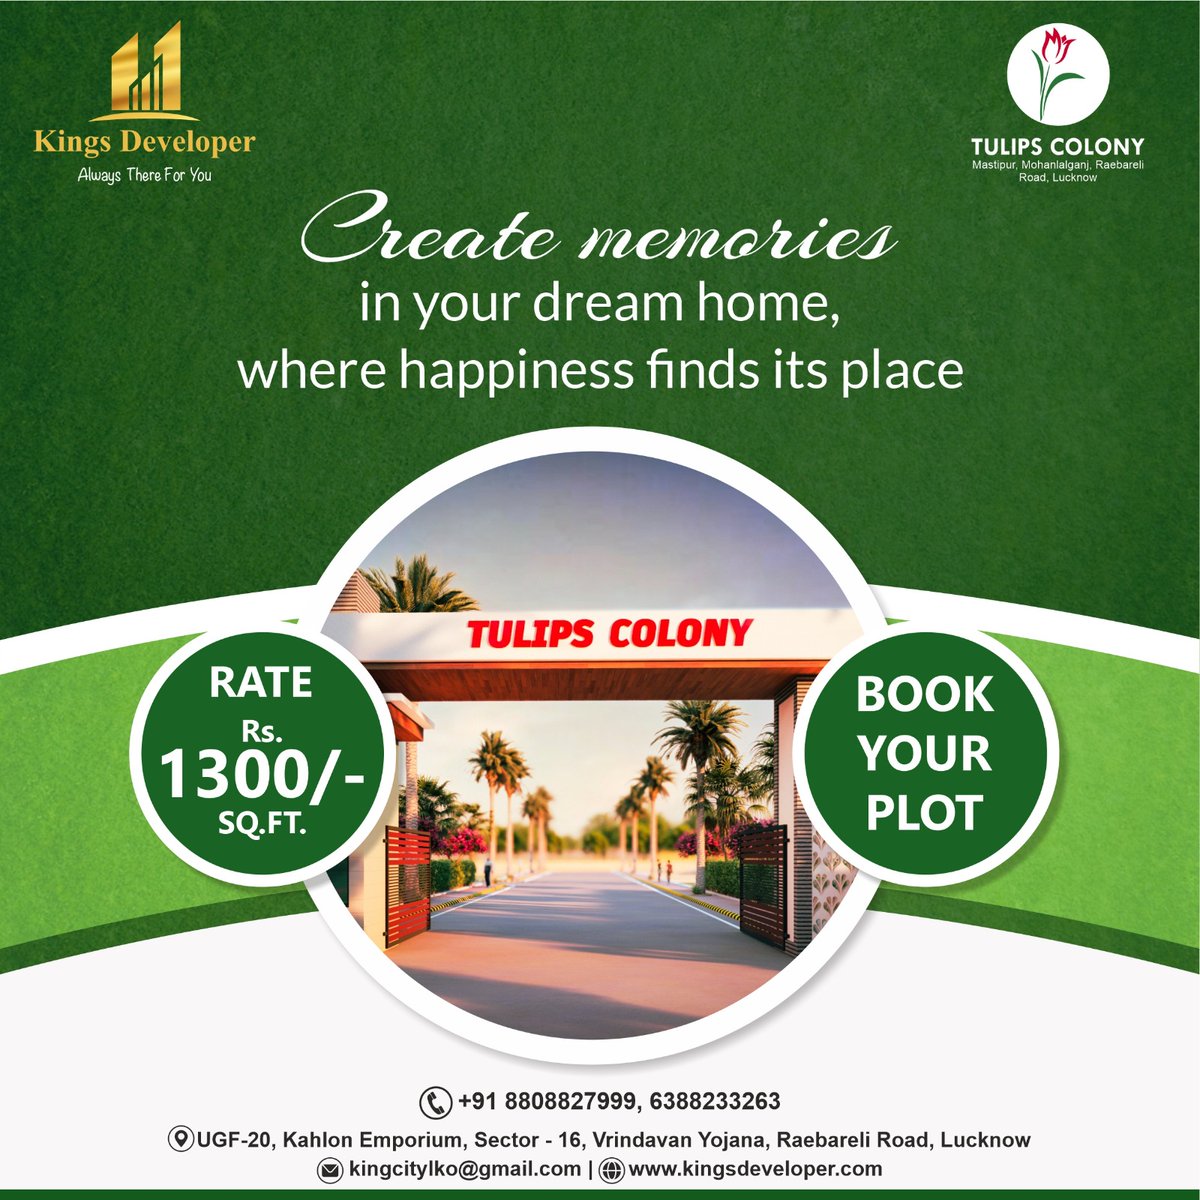 Discover the joy of #DreamHomes with Kings Developer! 🌟 #LuxuryLiving #AffordableHomes #RealEstate #PlotBooking #LucknowLiving #VrindavanYojana #RaebareliRoad #InvestInYourFuture #BookNow #MemoriesMadeHere #YourDreamAwaits #HappinessUnlimited #HomeOwnership #CreateMemories